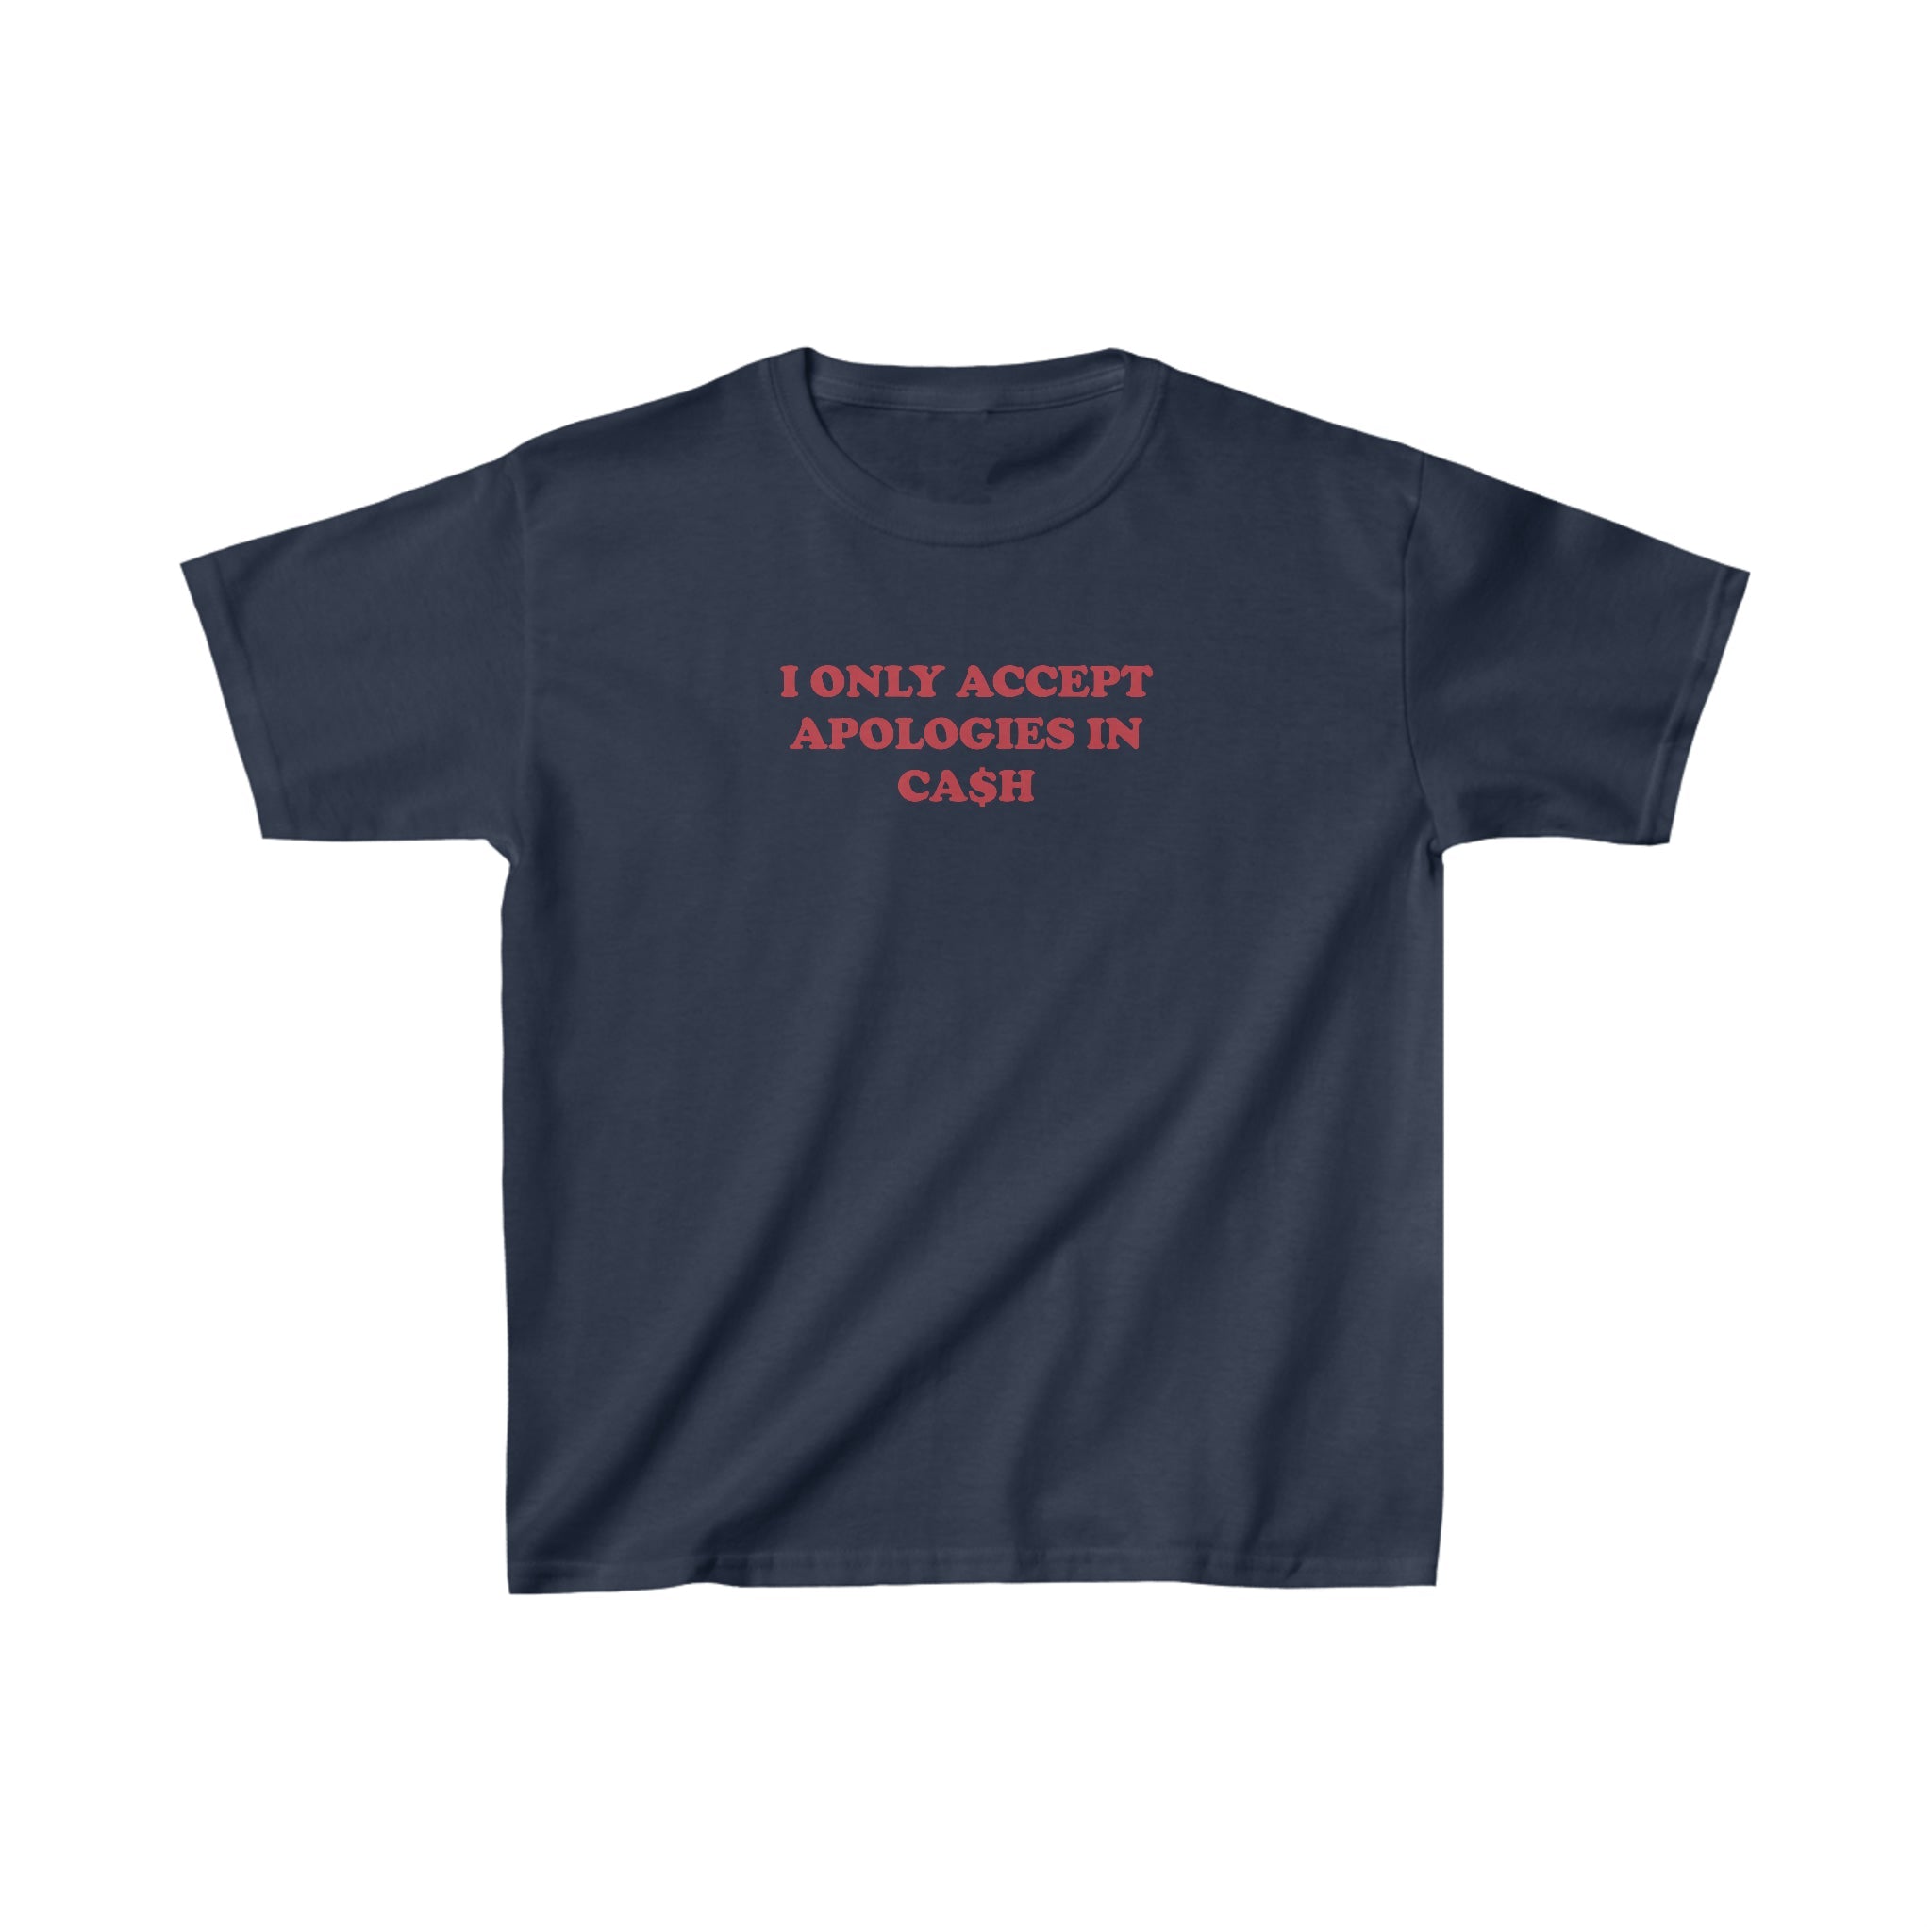 'I Only Accept Apologies in Cash' baby tee - In Print We Trust